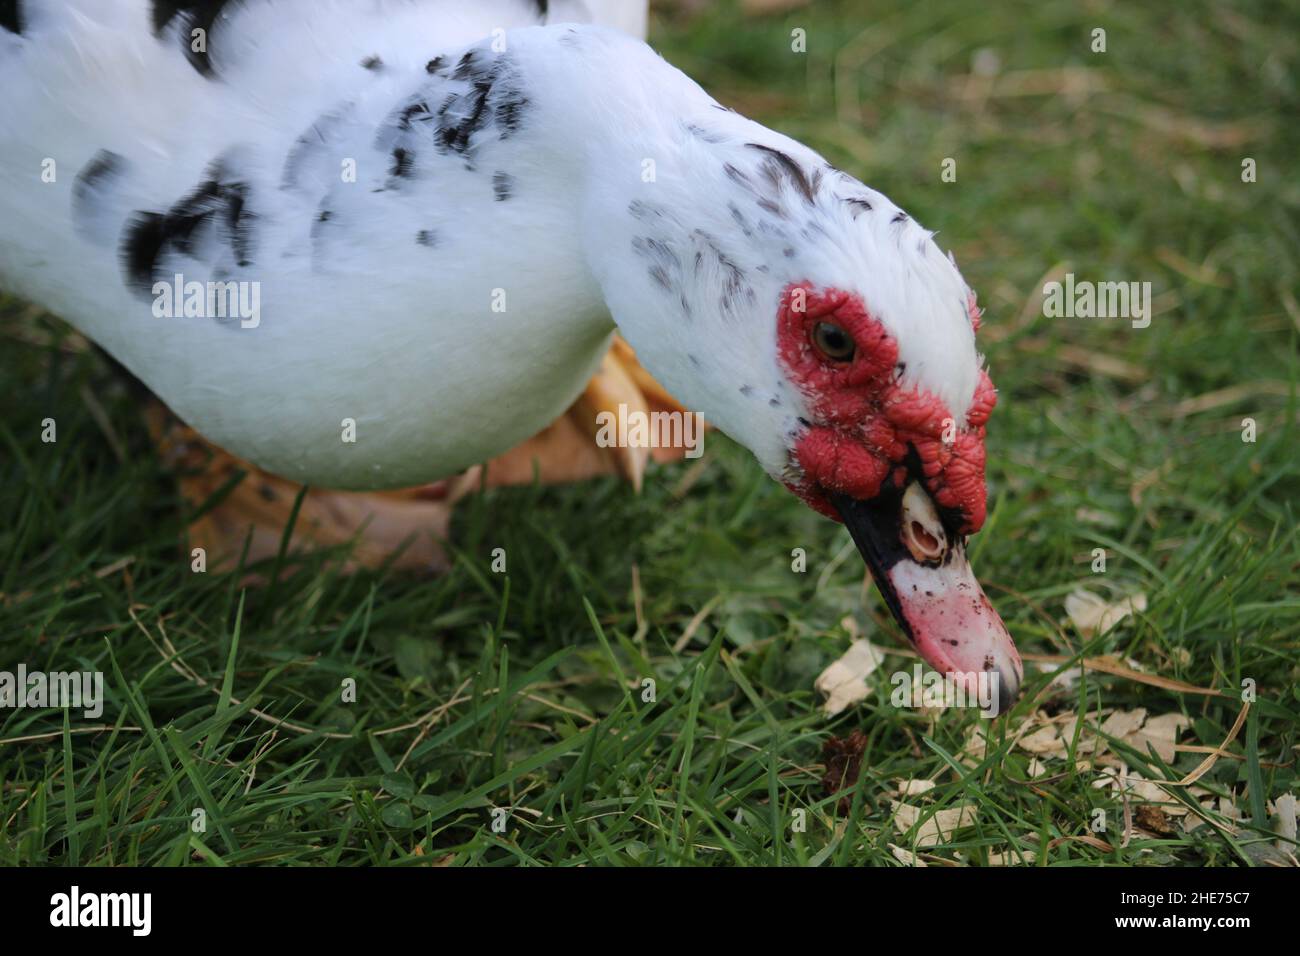 Muscovy duck foraging in the grass/ Stock Photo